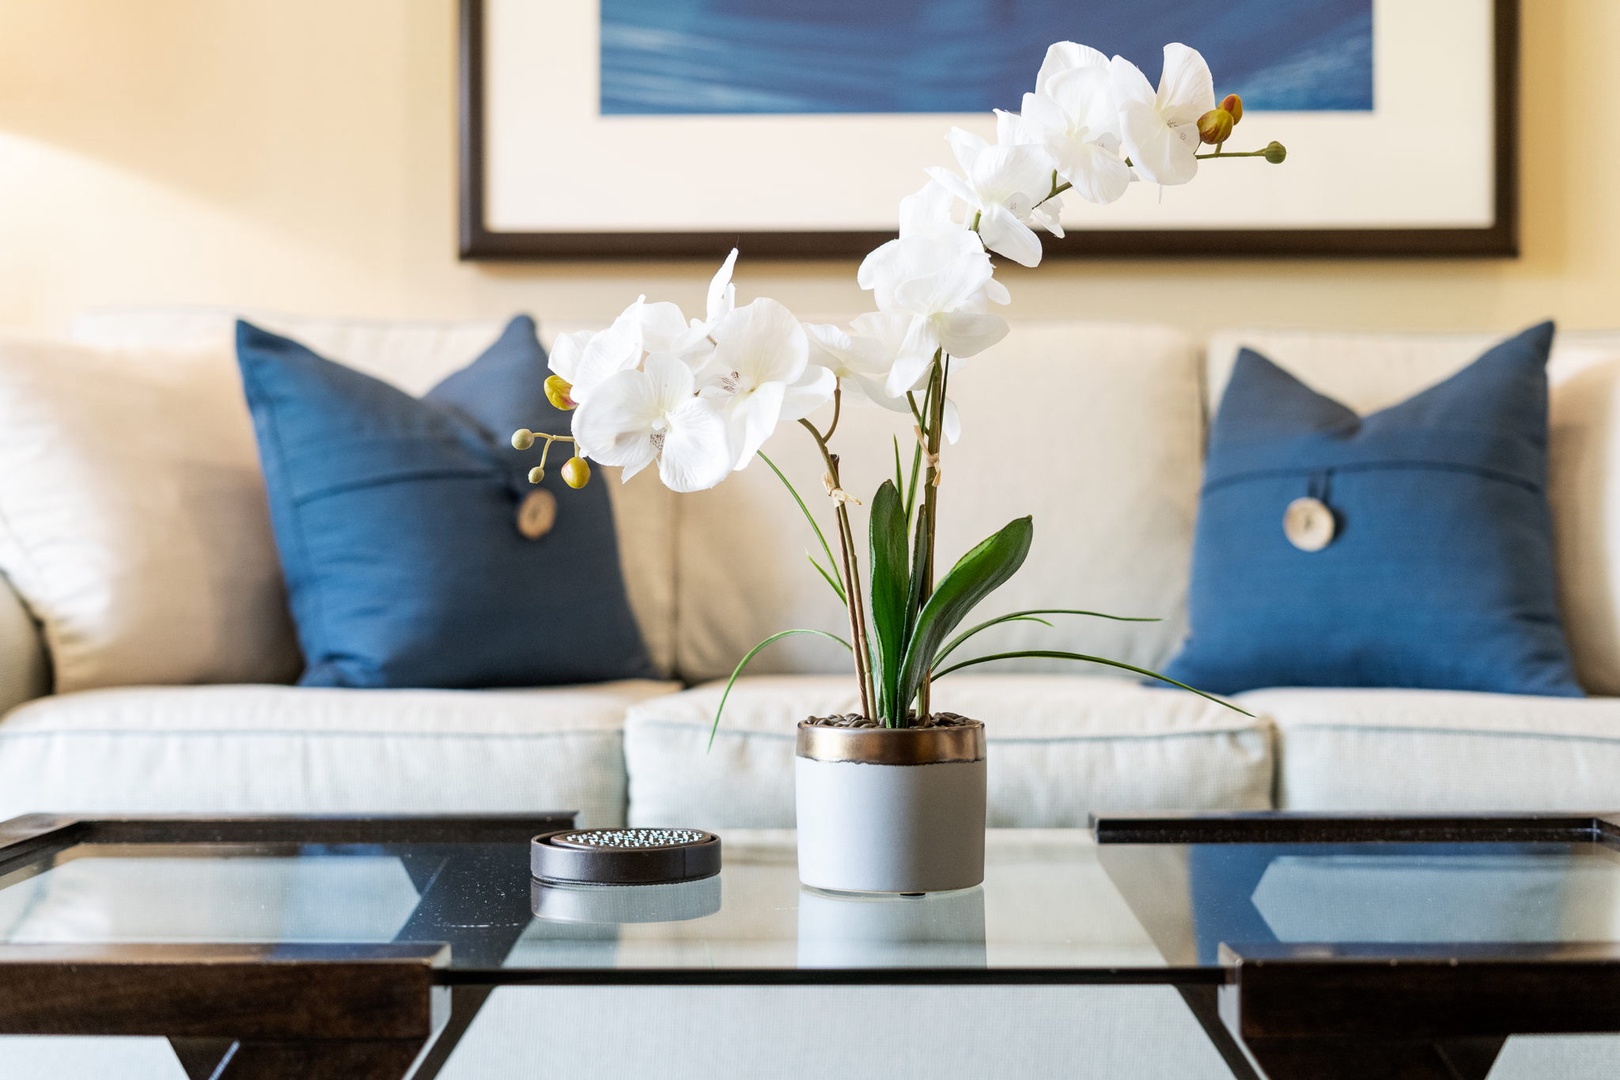 Kahuku Vacation Rentals, Turtle Bay Villas 114 - Beautiful floral details in the living area